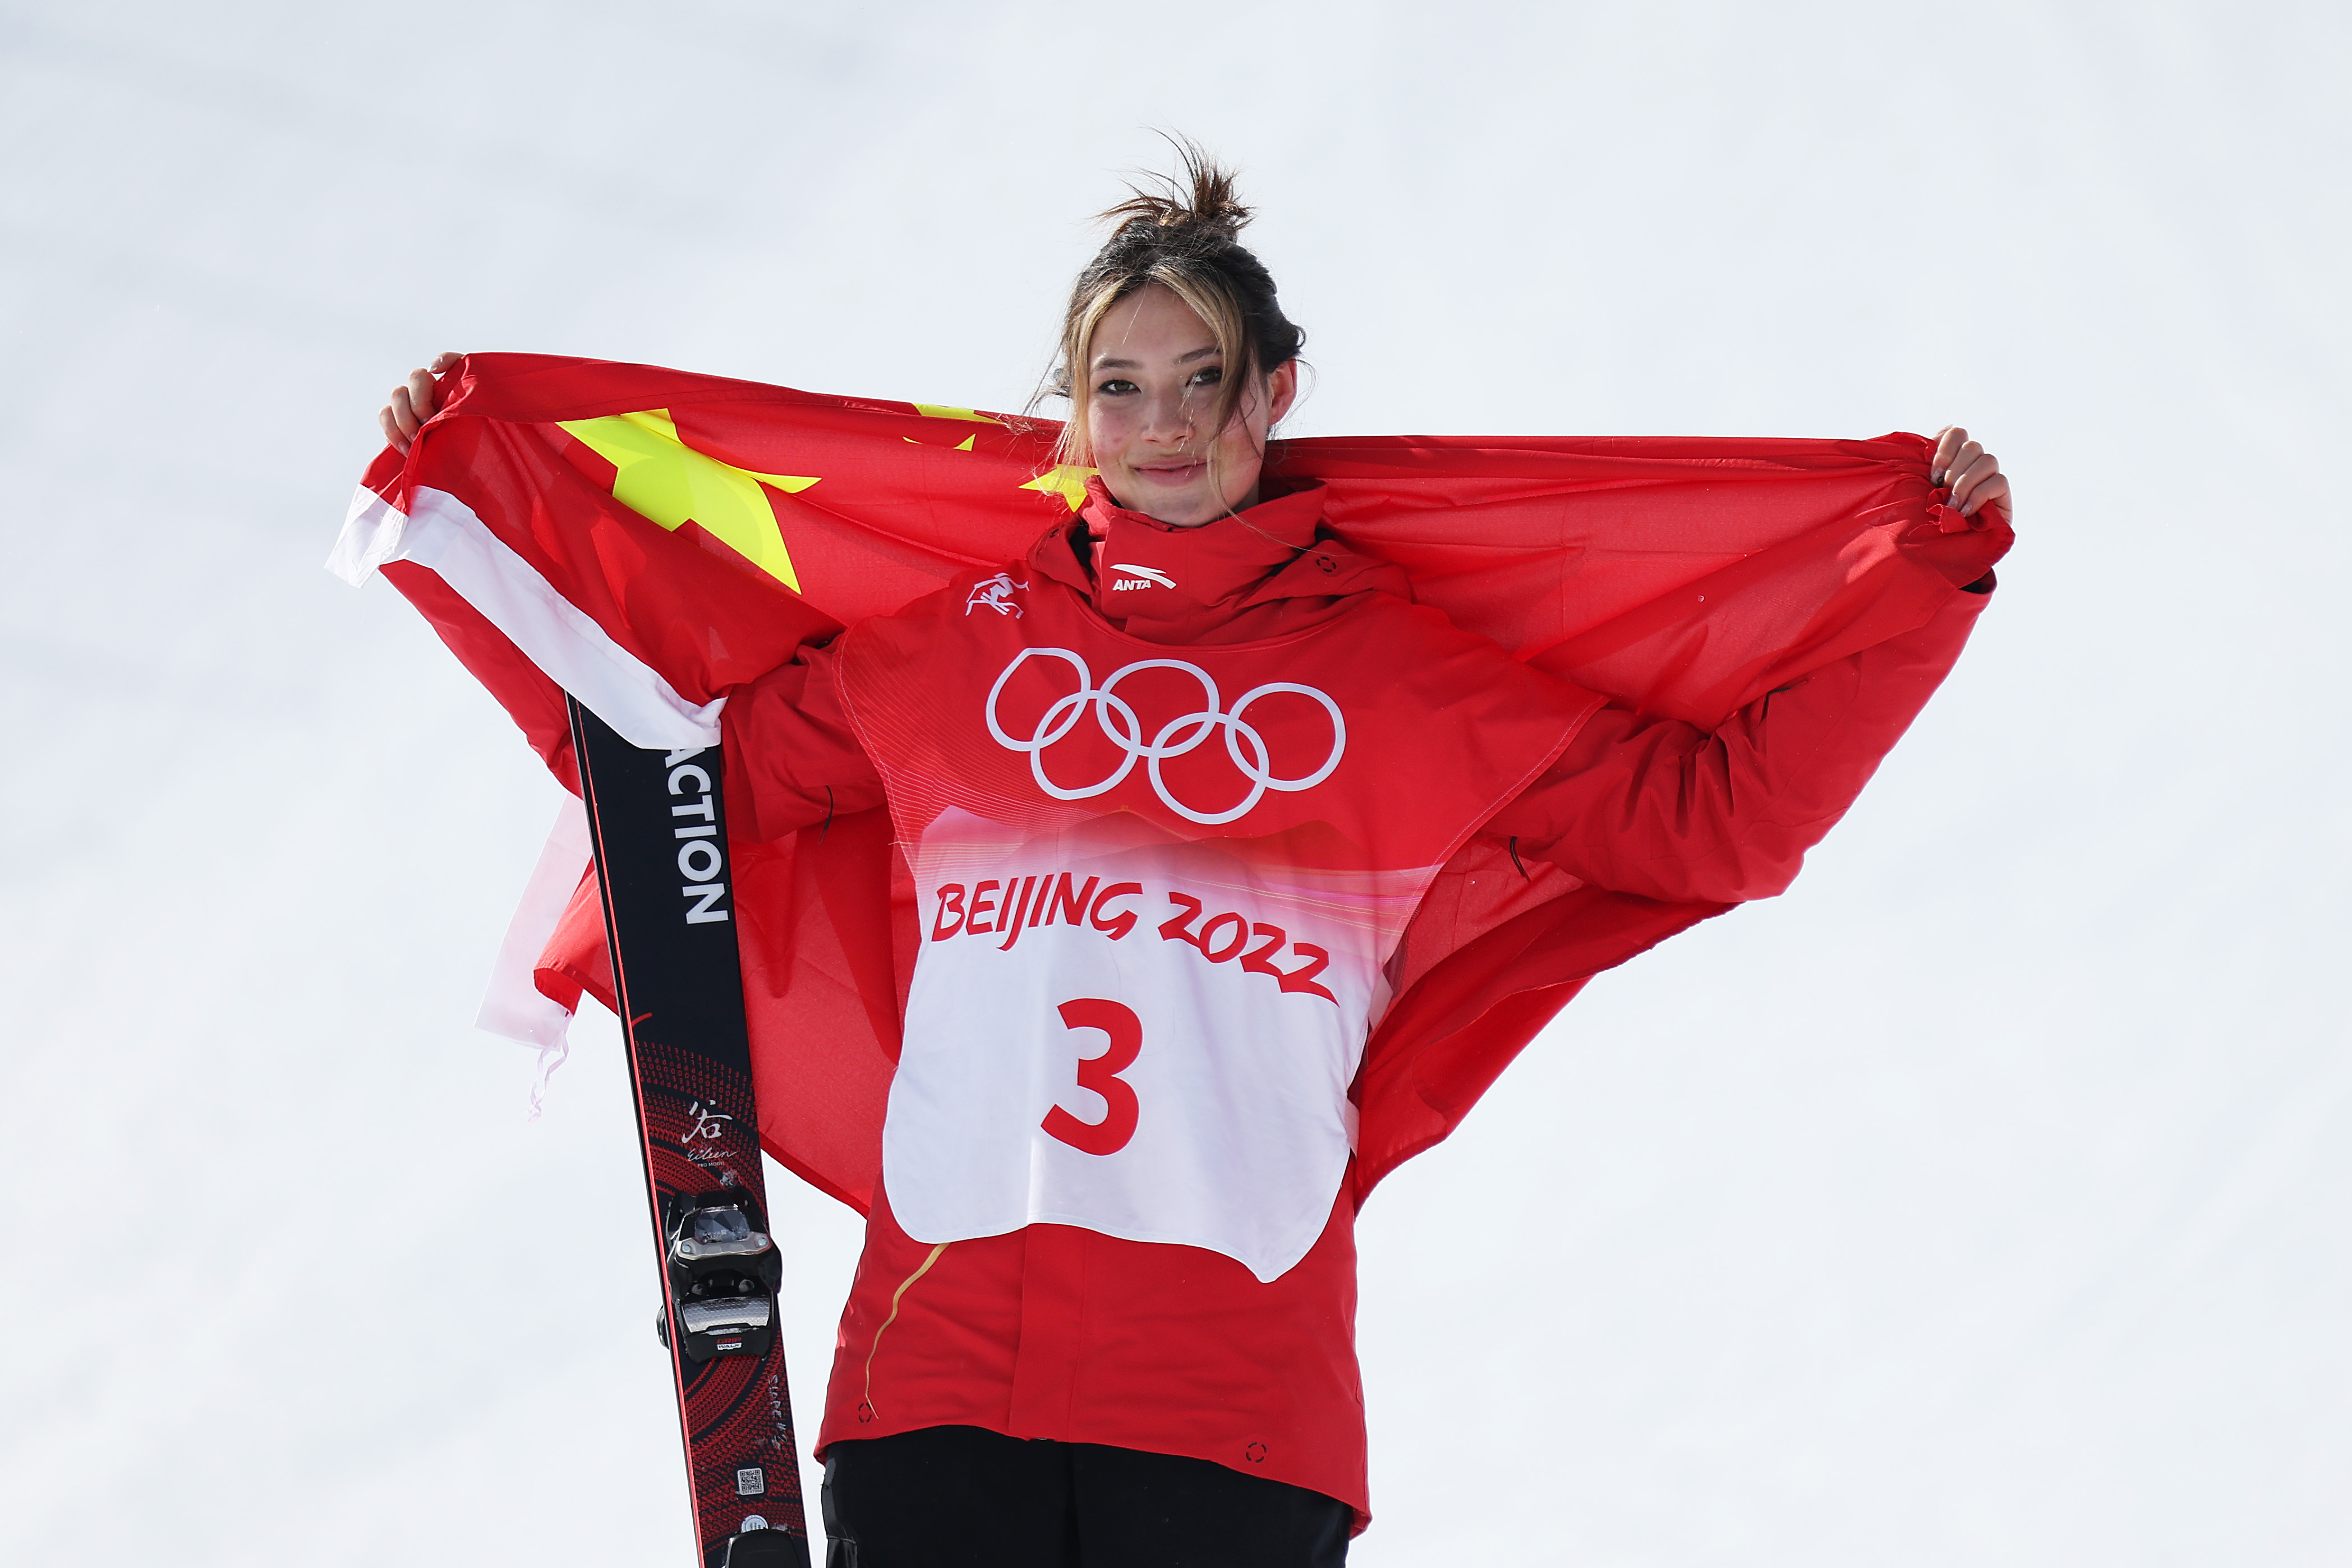 Eileen Gu celebrates her silver medal victory for China. (Maddie Meyer / Getty Images)